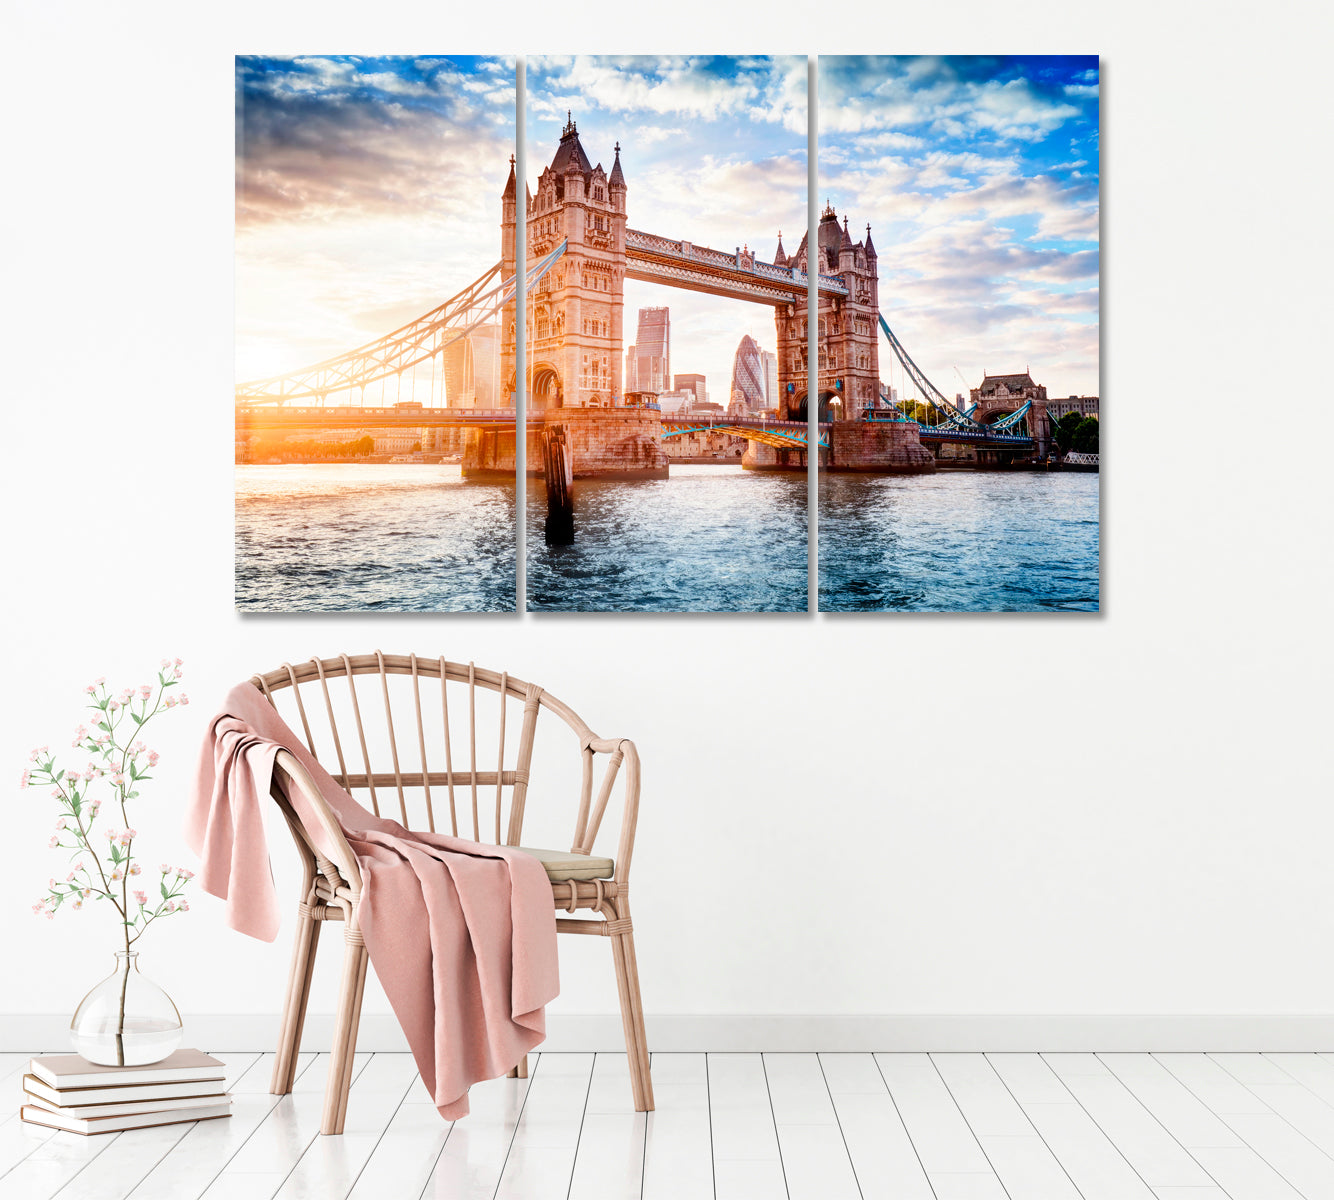 London's Tower Bridge at Sunset Canvas Print ArtLexy 3 Panels 36"x24" inches 